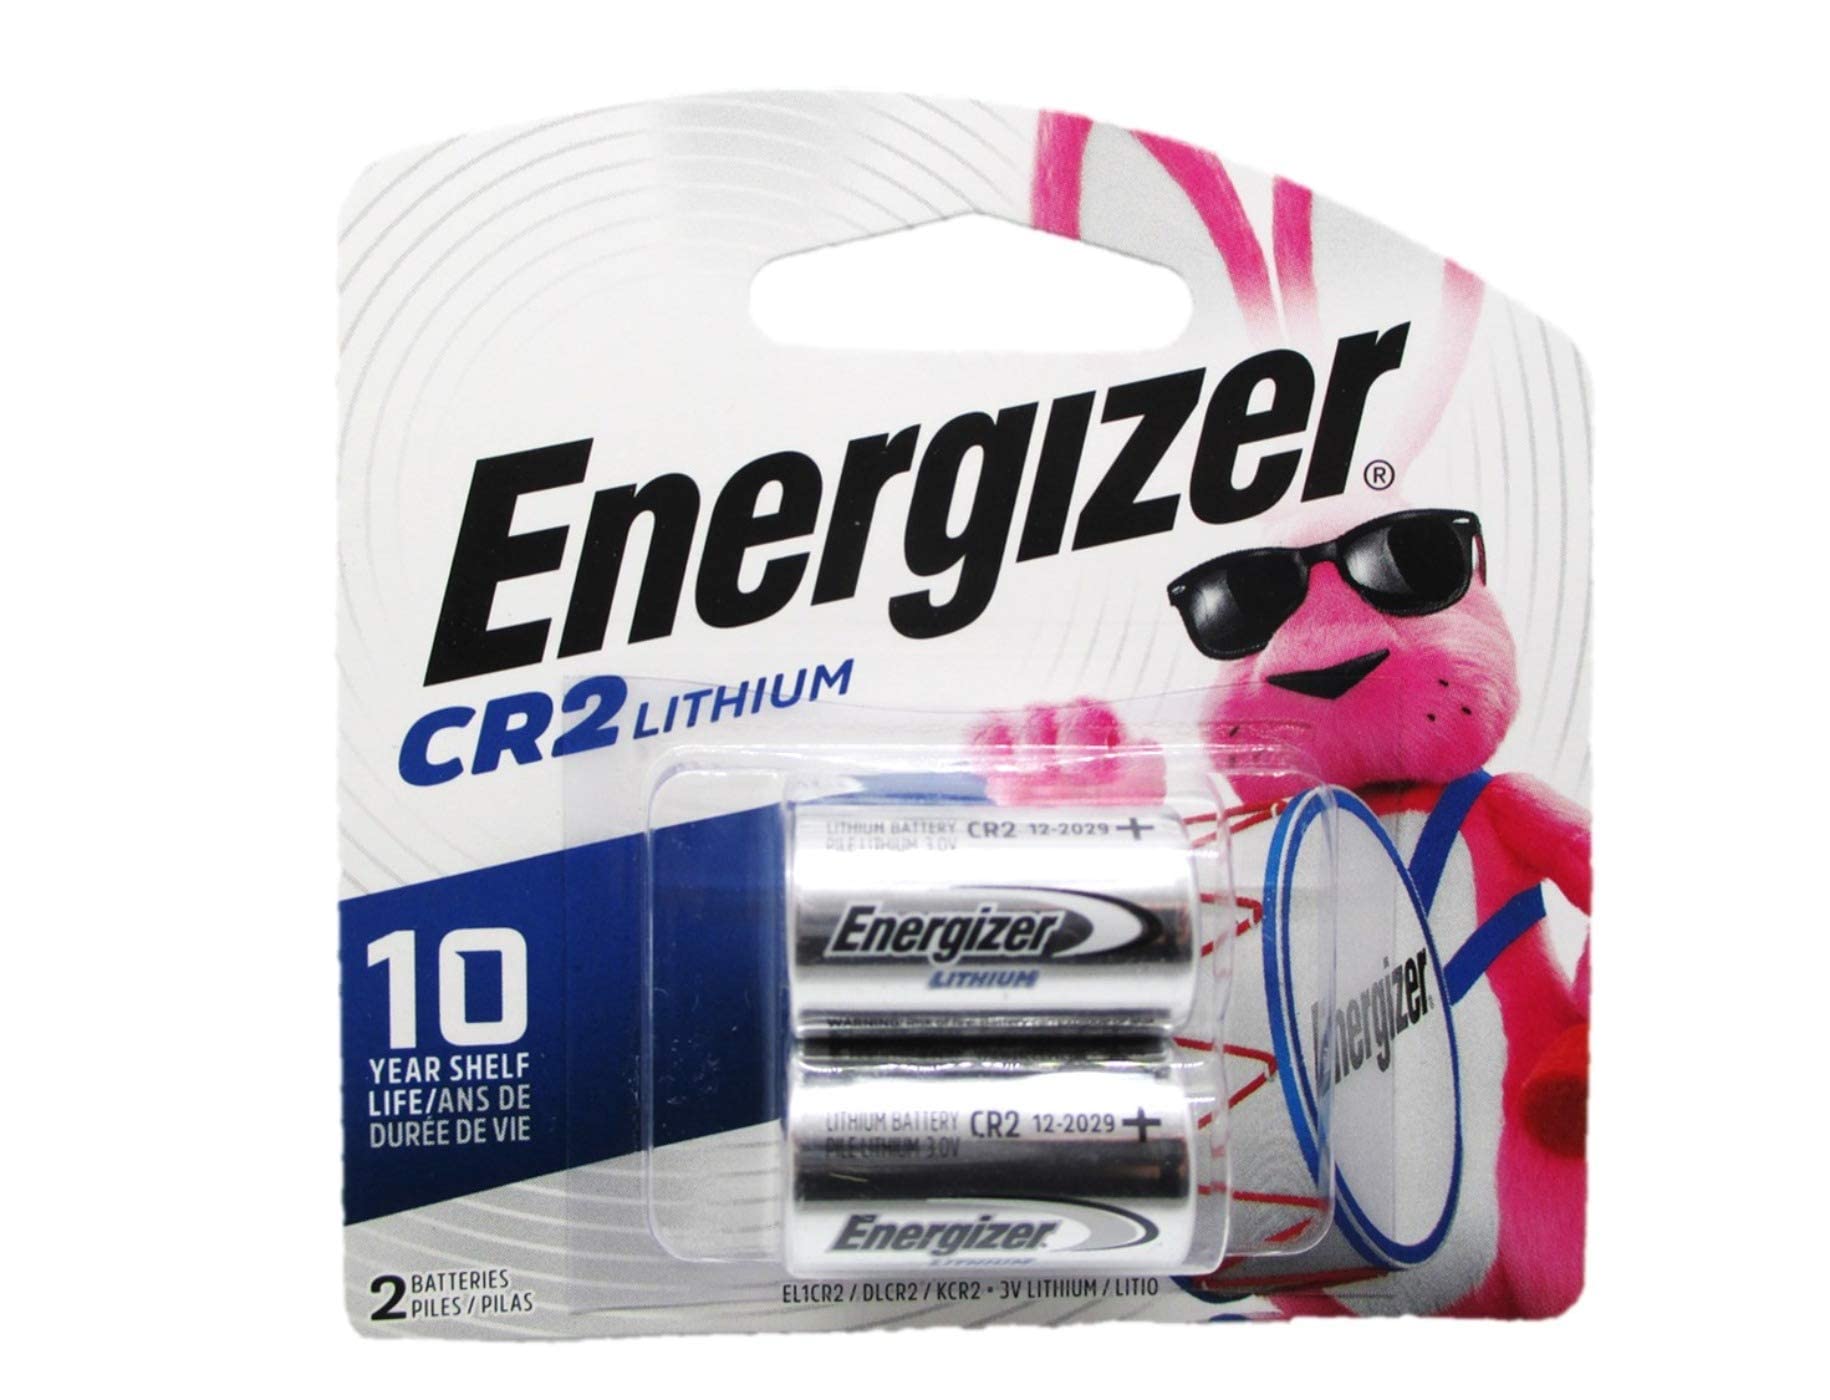 Energizer CR2 Lithium Battery, Pack of 2